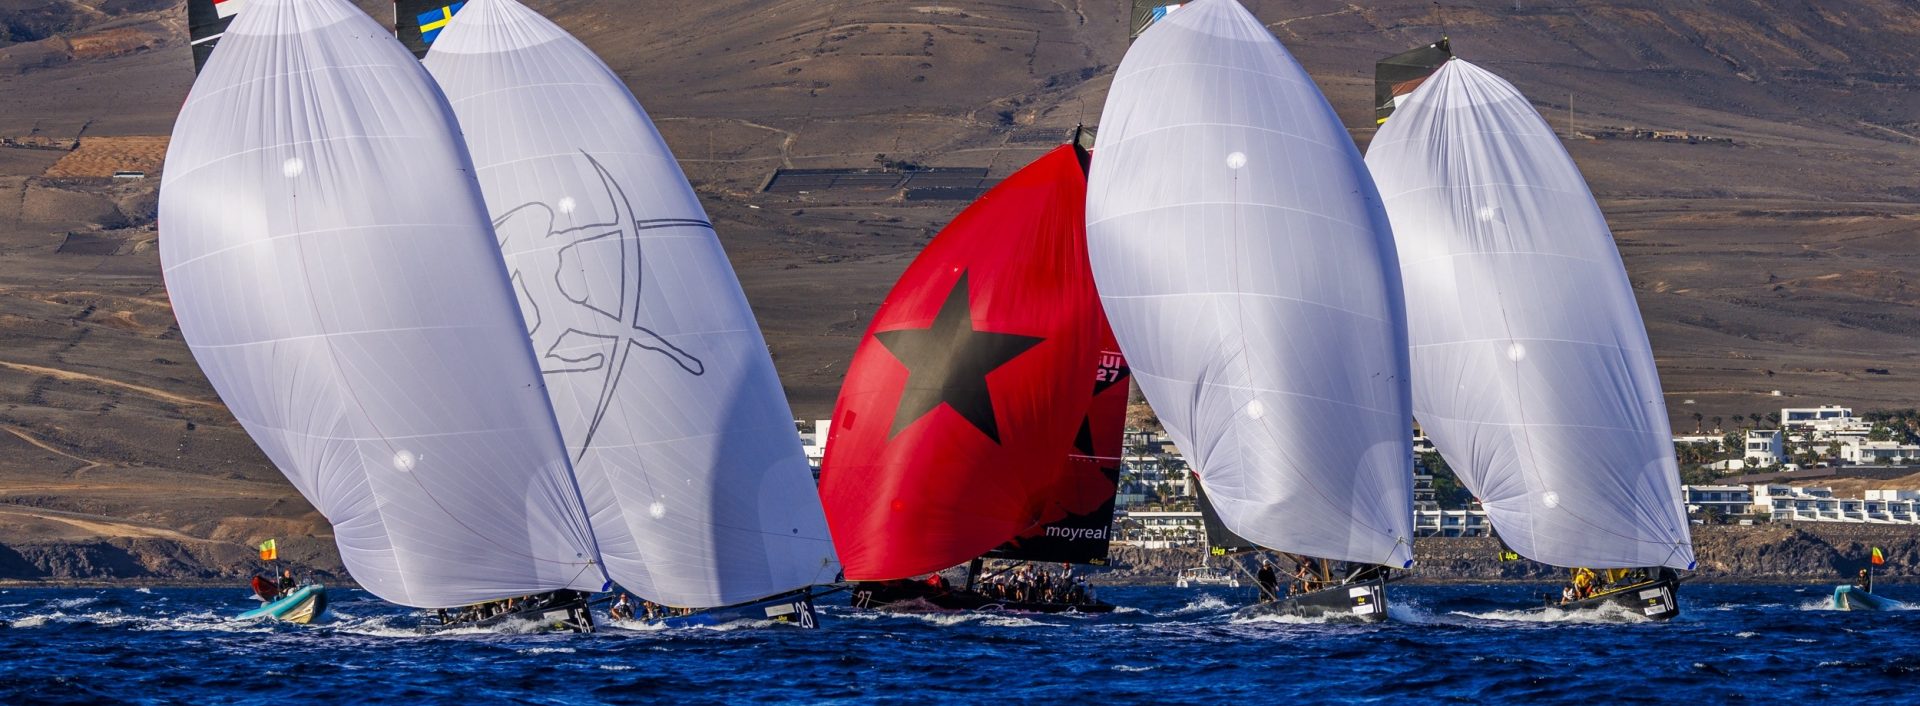 Aleph consolidates off Puerto Calero as Charisma eyes the 2023 title